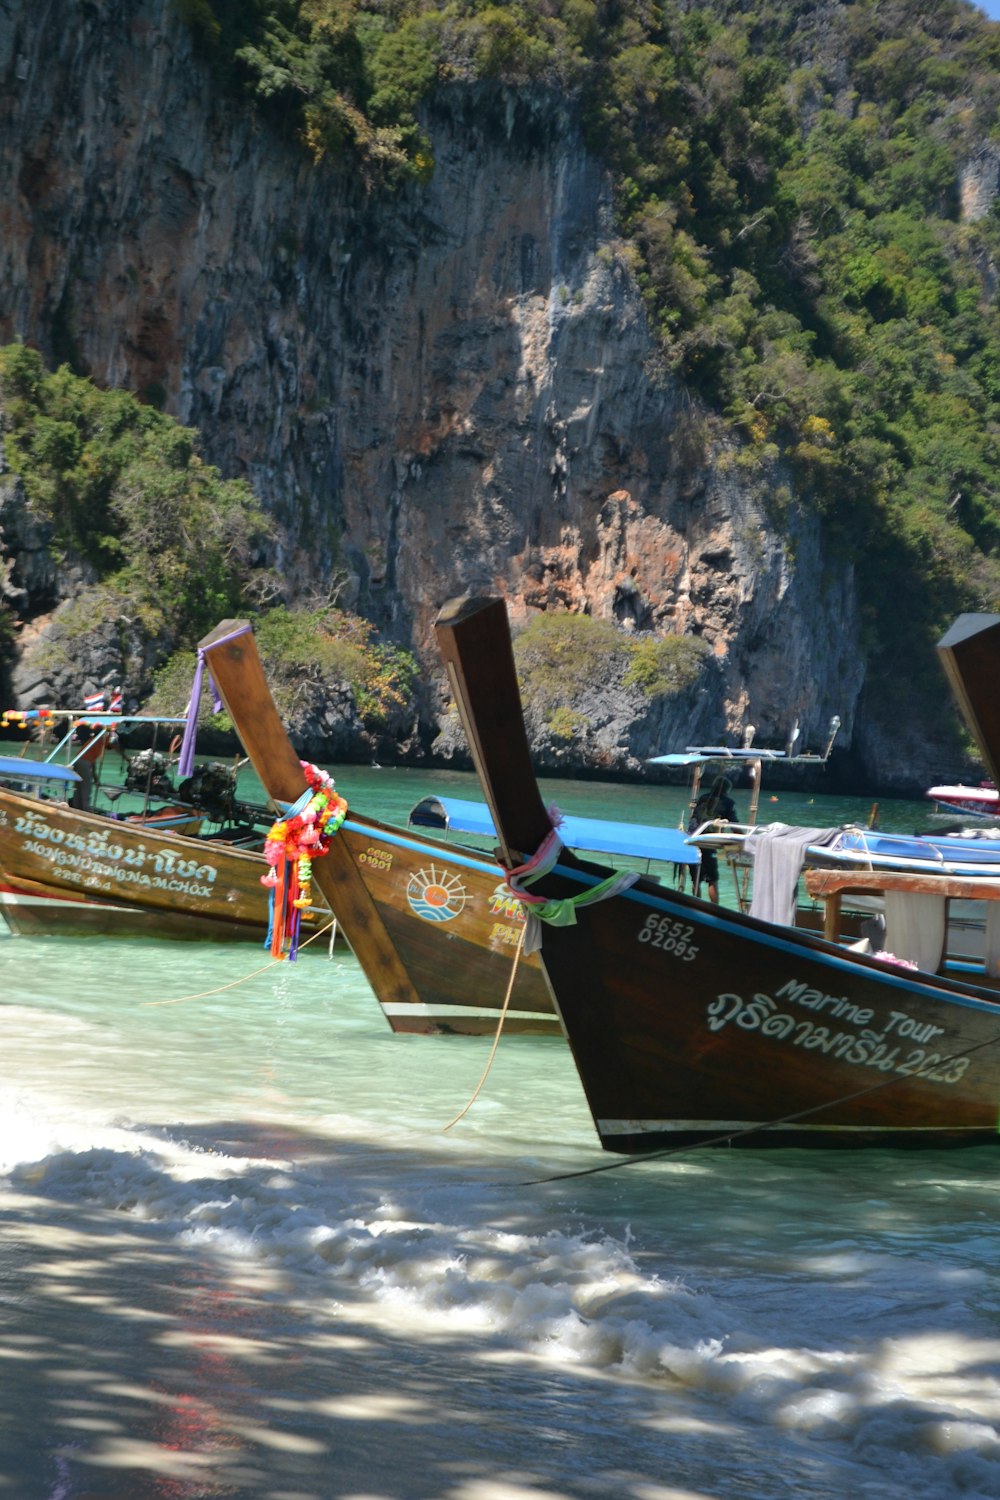 a group of boats that are sitting in the water